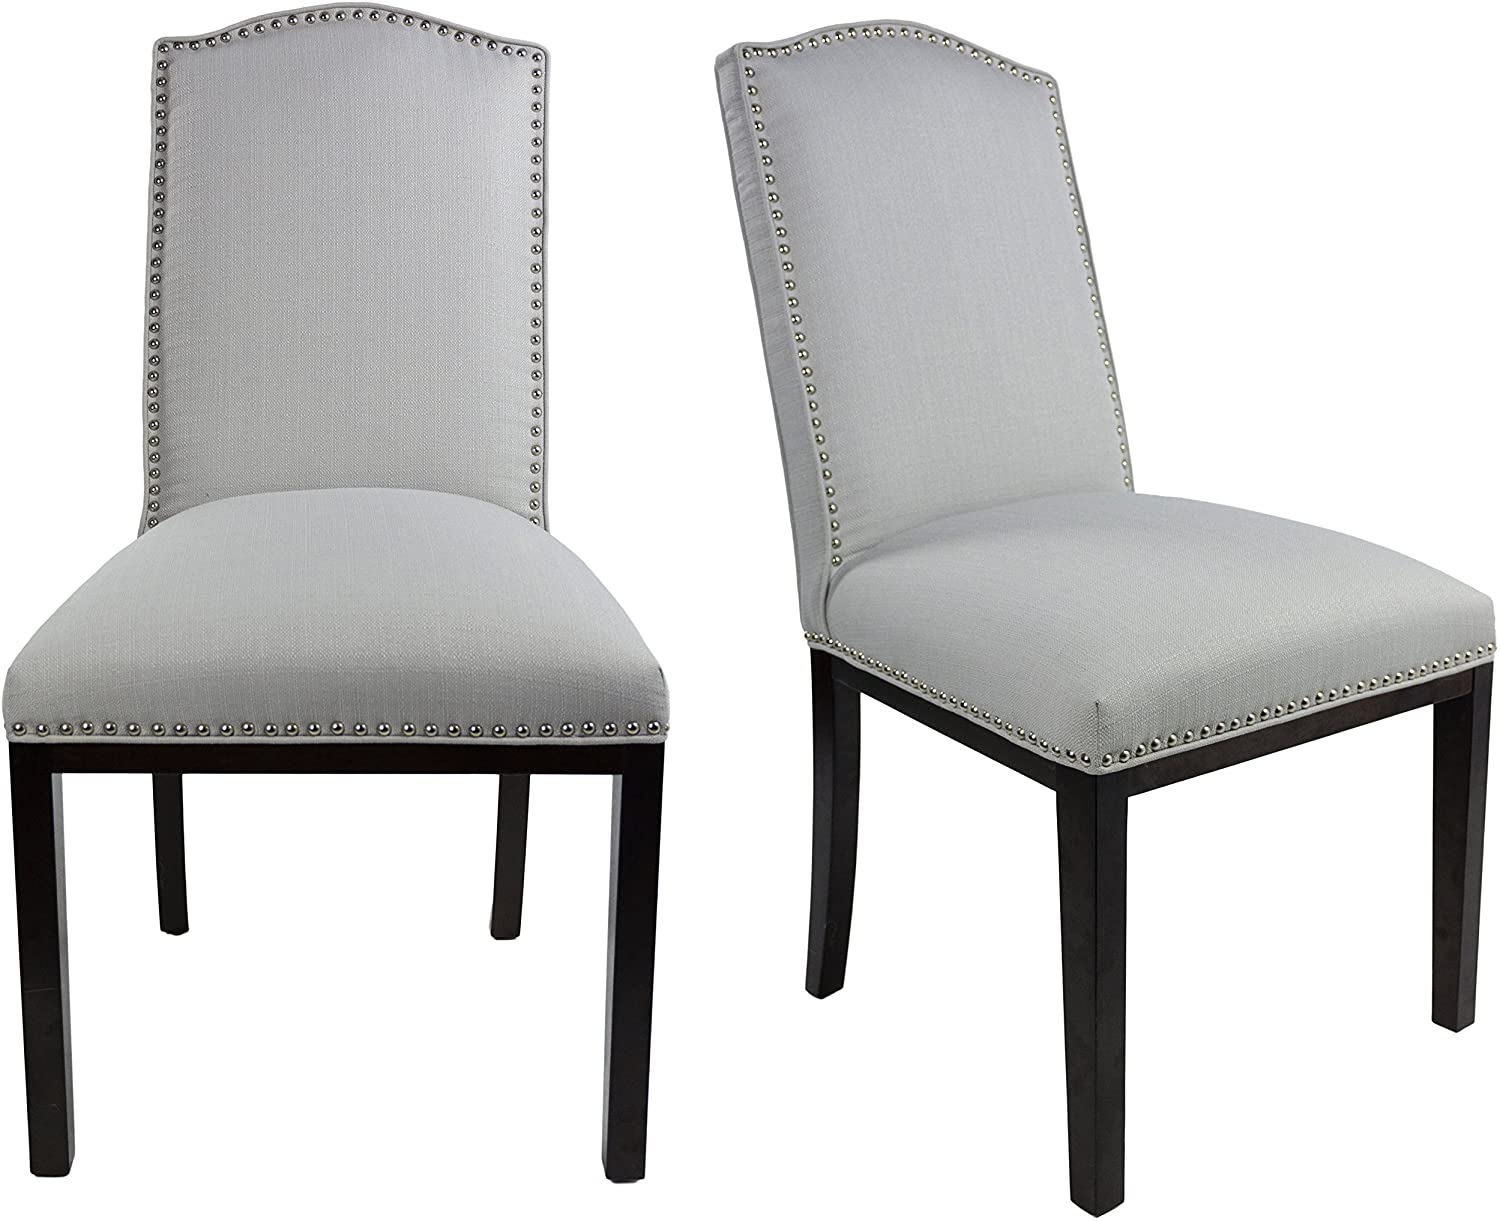 B075DM538W Sole Designs Allison Collection Modern Upholstered Dining Room Chair With Cambel Back Design and Nailhead Trim, Set of 2, Ash Gray